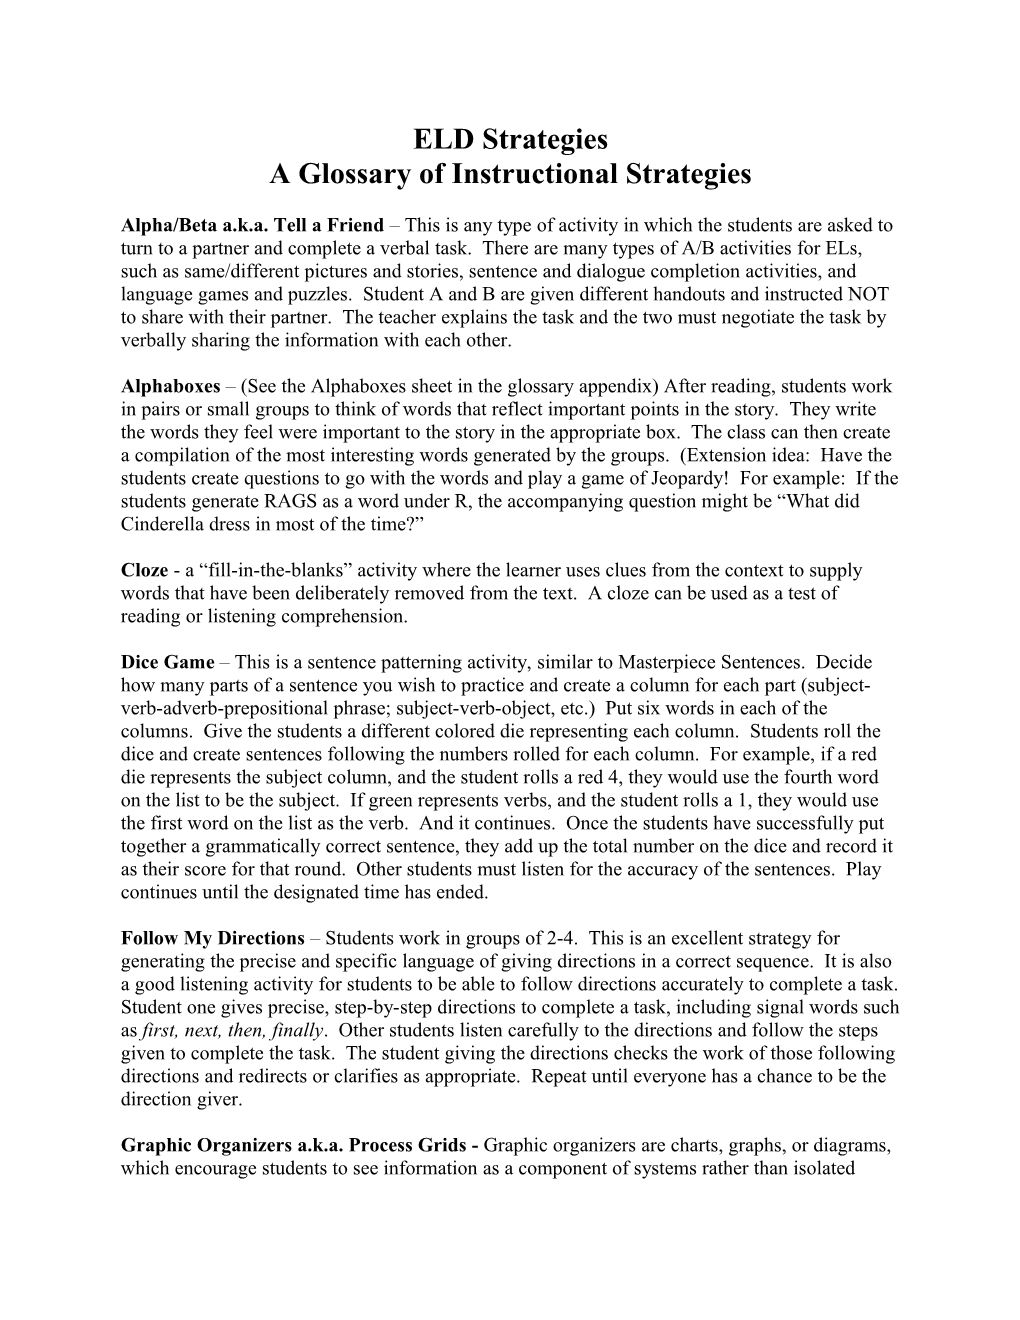 A Glossary of Instructional Strategies